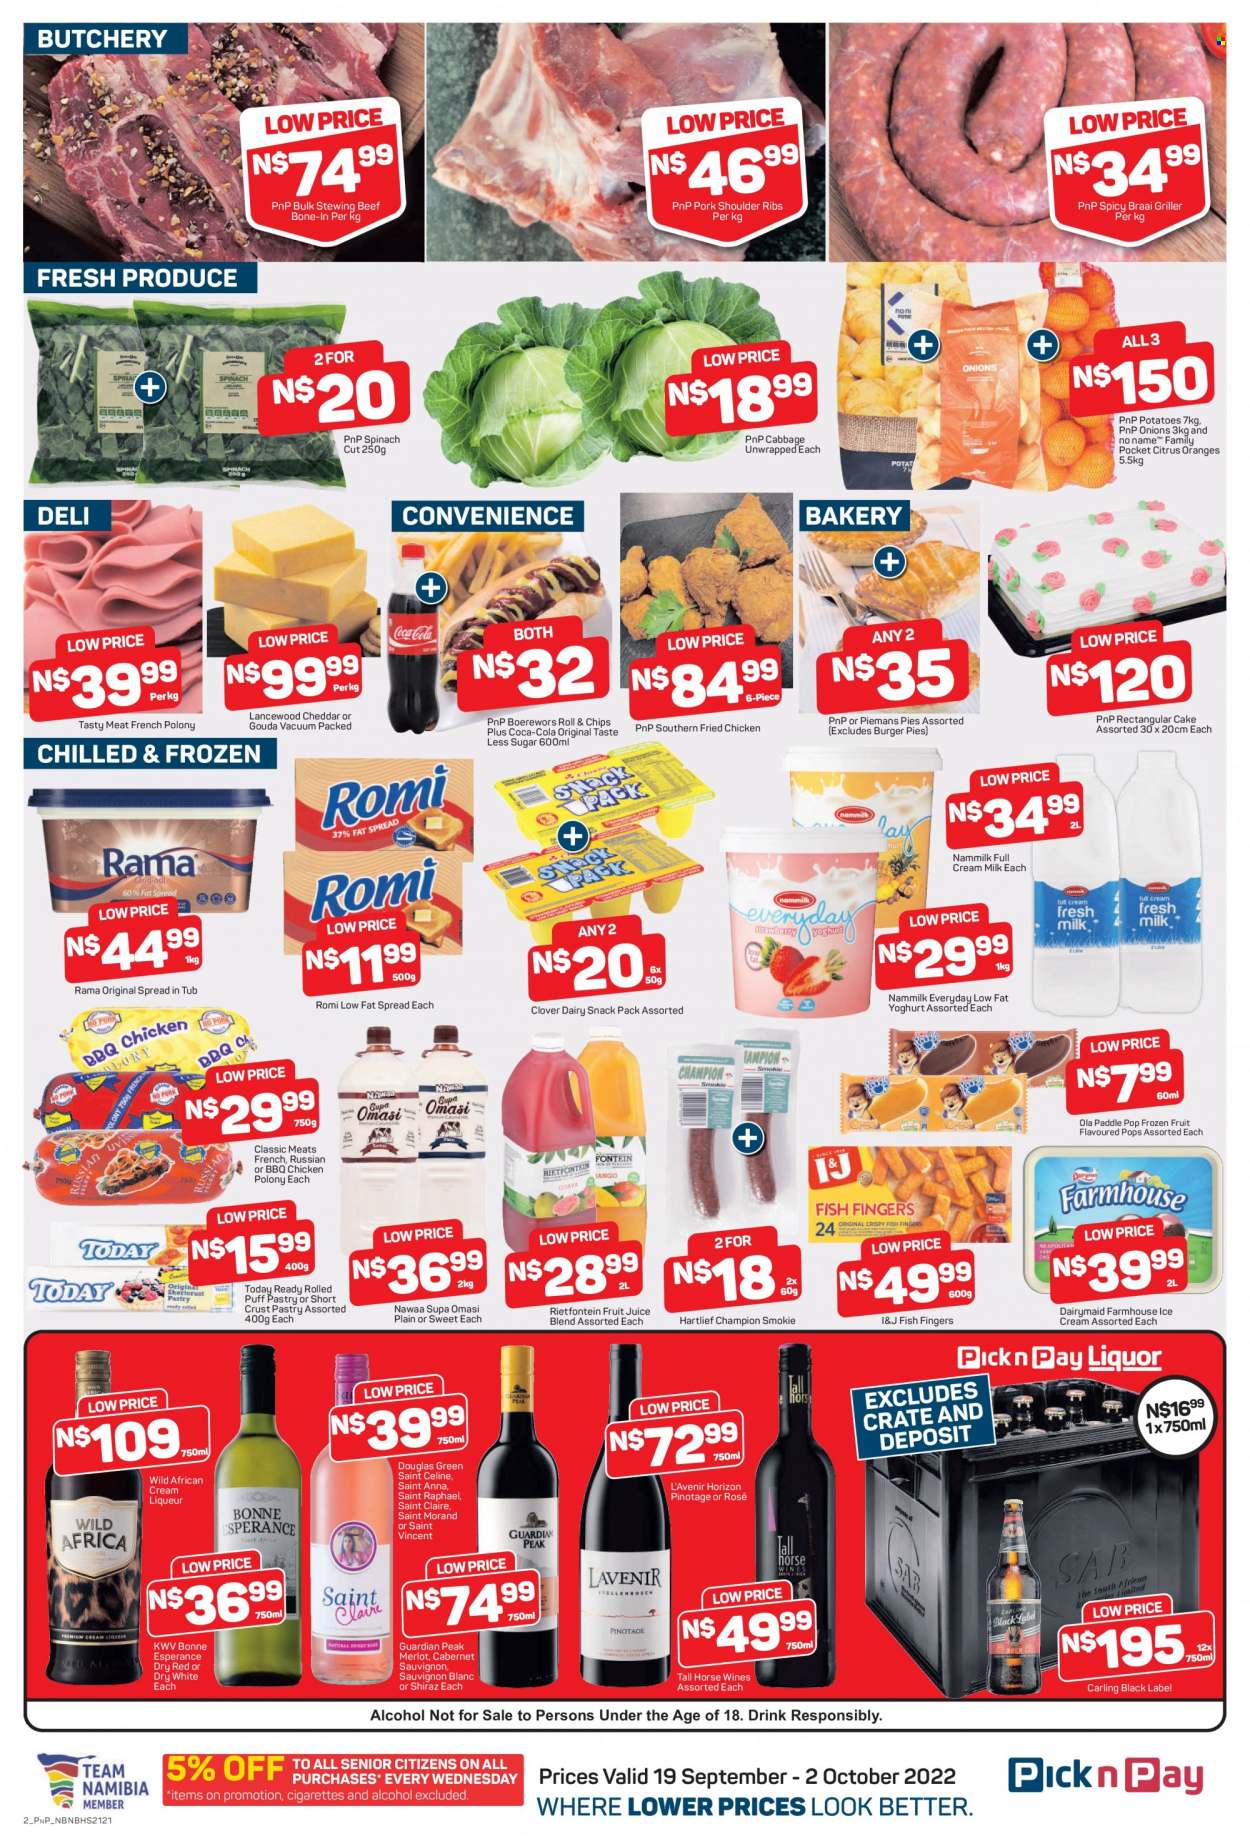 thumbnail - Pick n Pay catalogue  - 19/09/2022 - 02/10/2022 - Sales products - cake, cabbage, potatoes, onion, oranges, fish, fish fingers, fish sticks, hamburger, fried chicken, french polony, polony, chicken polony, gouda, cheese, Lancewood, yoghurt, Clover, fat spread, Rama, puff pastry, ice cream, Ola, Coca-Cola, fruit juice, juice, Cabernet Sauvignon, red wine, white wine, Merlot, alcohol, KWV, Shiraz, Sauvignon Blanc, rosé wine, liqueur, Carling, beef meat, stewing beef, pork meat, pork shoulder, beef bone, braai wors. Page 3.